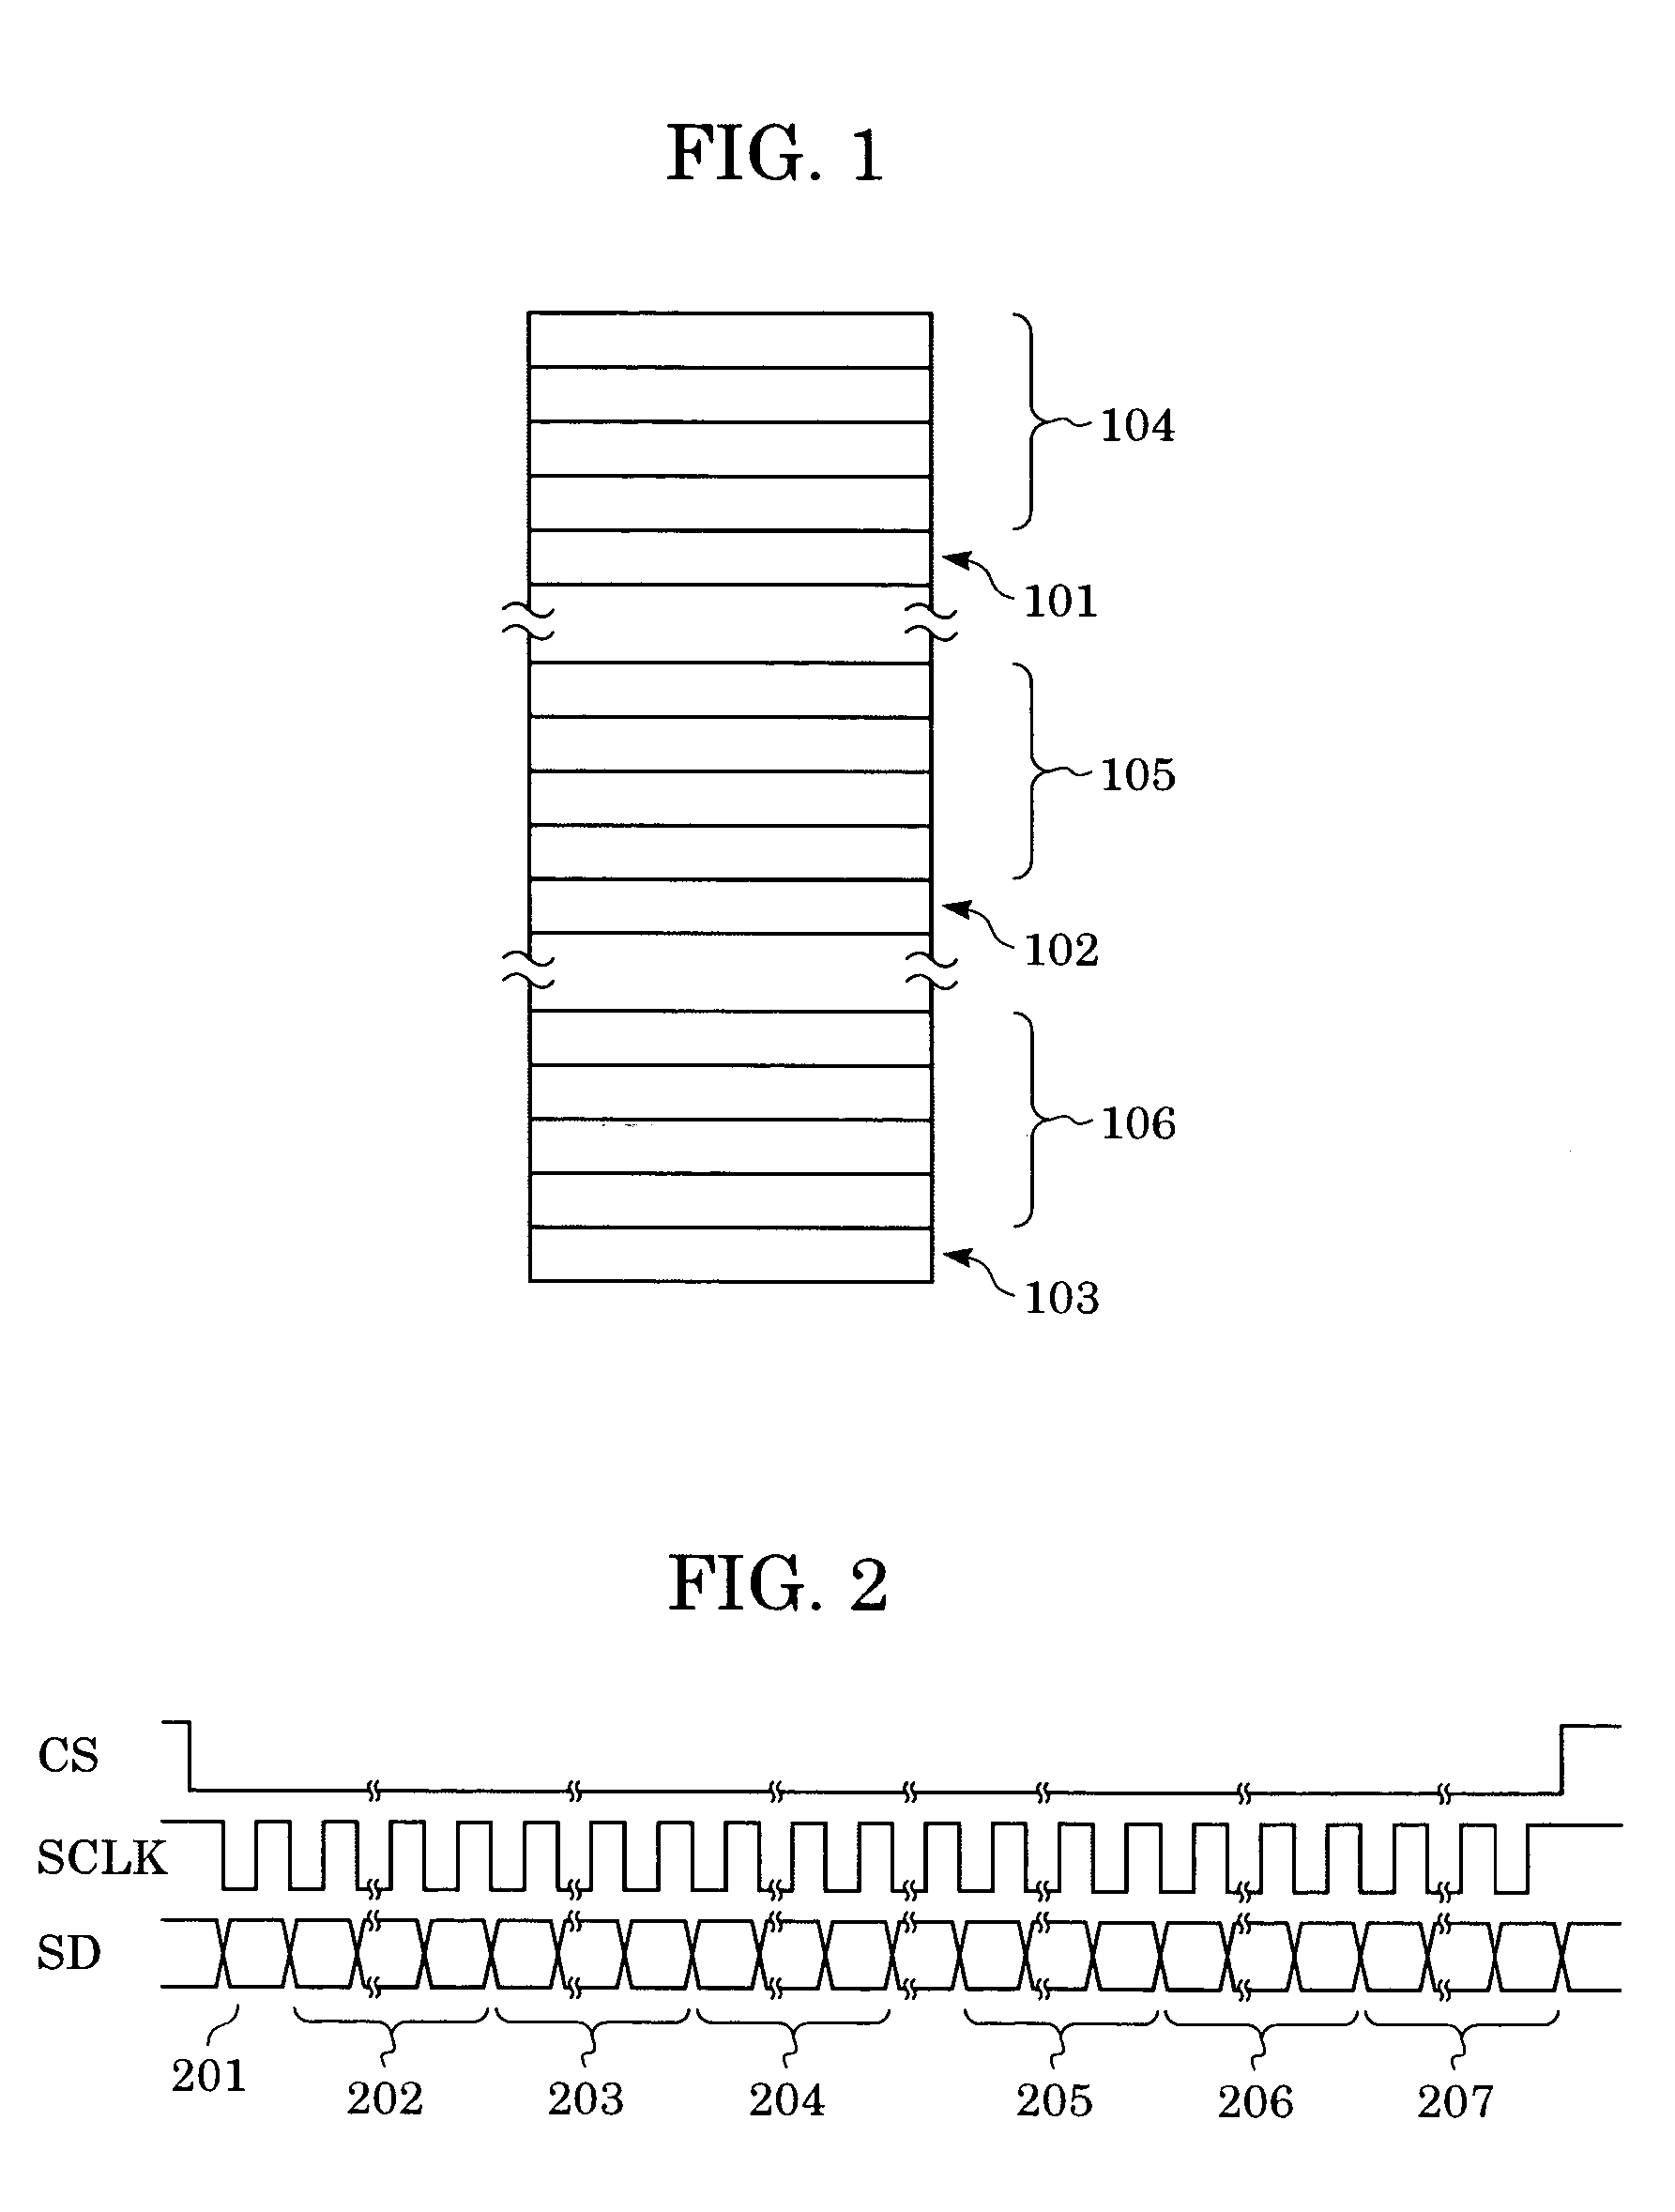 Relay apparatus for relaying communication from CPU to peripheral device